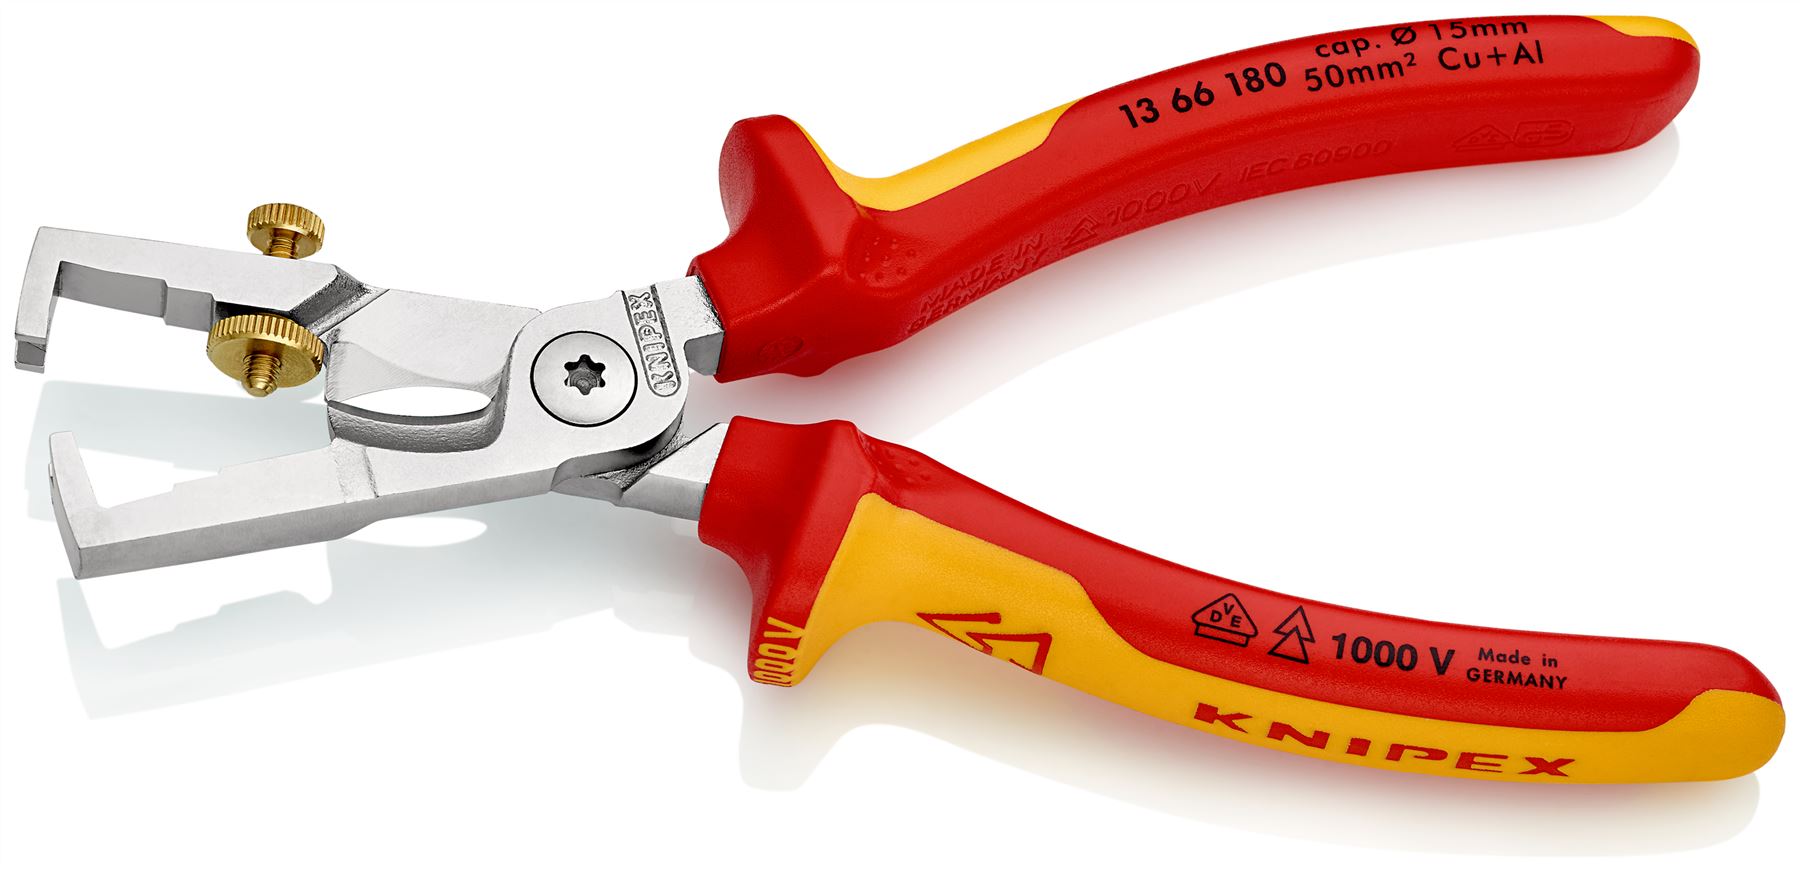 KNIPEX StriX Insulation Strippers with Cable Shears 180mm VDE Chrome Multi Component Grips 13 66 180 SB